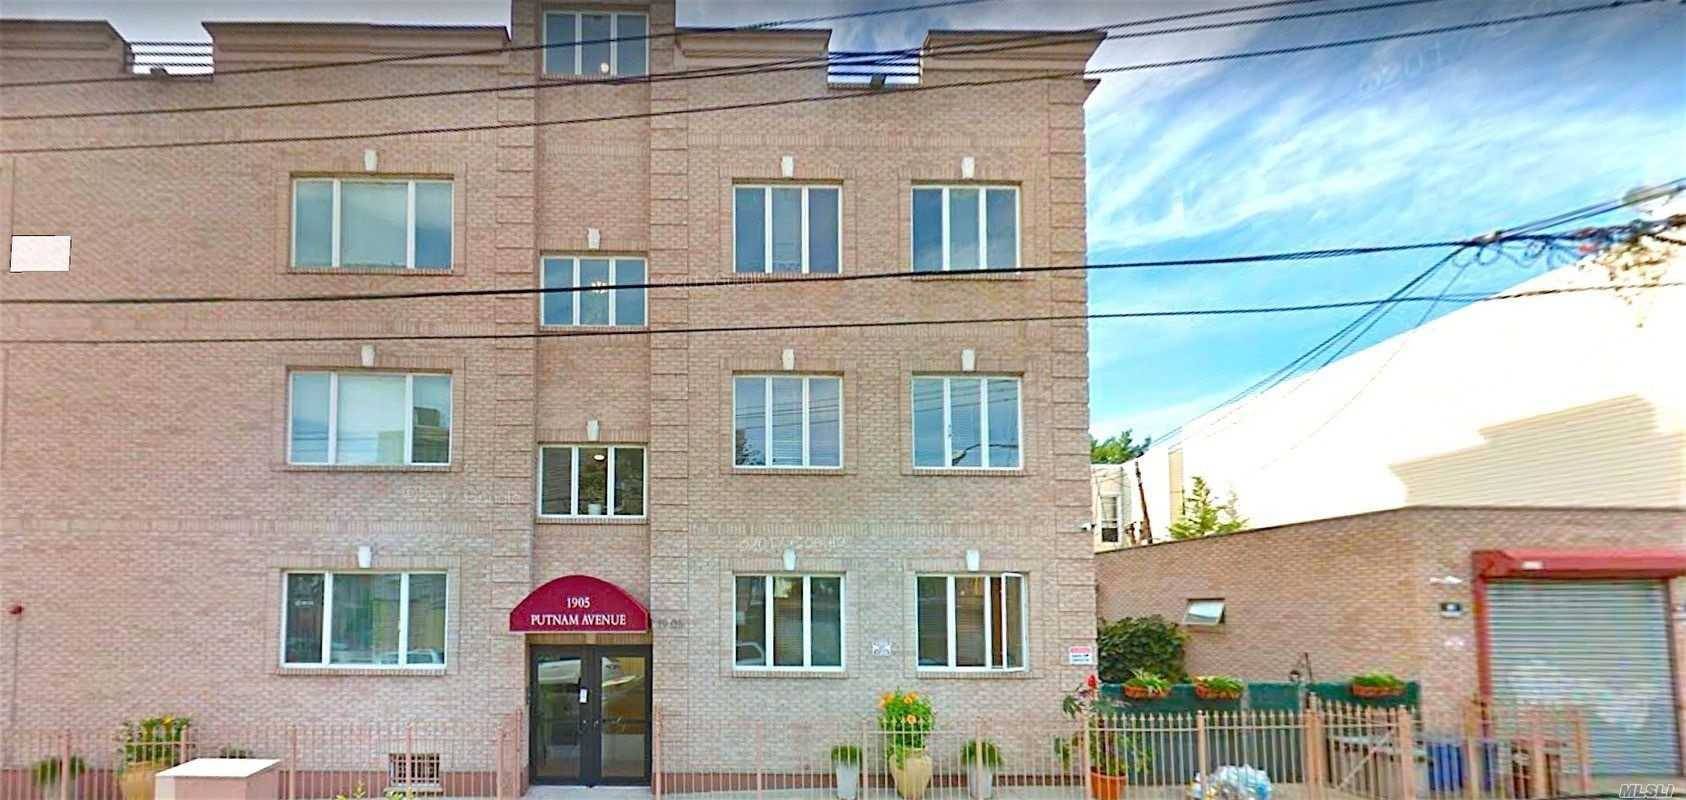 Two Bedroom Condo In Ridgewood, One Block From Forest M Train Station!